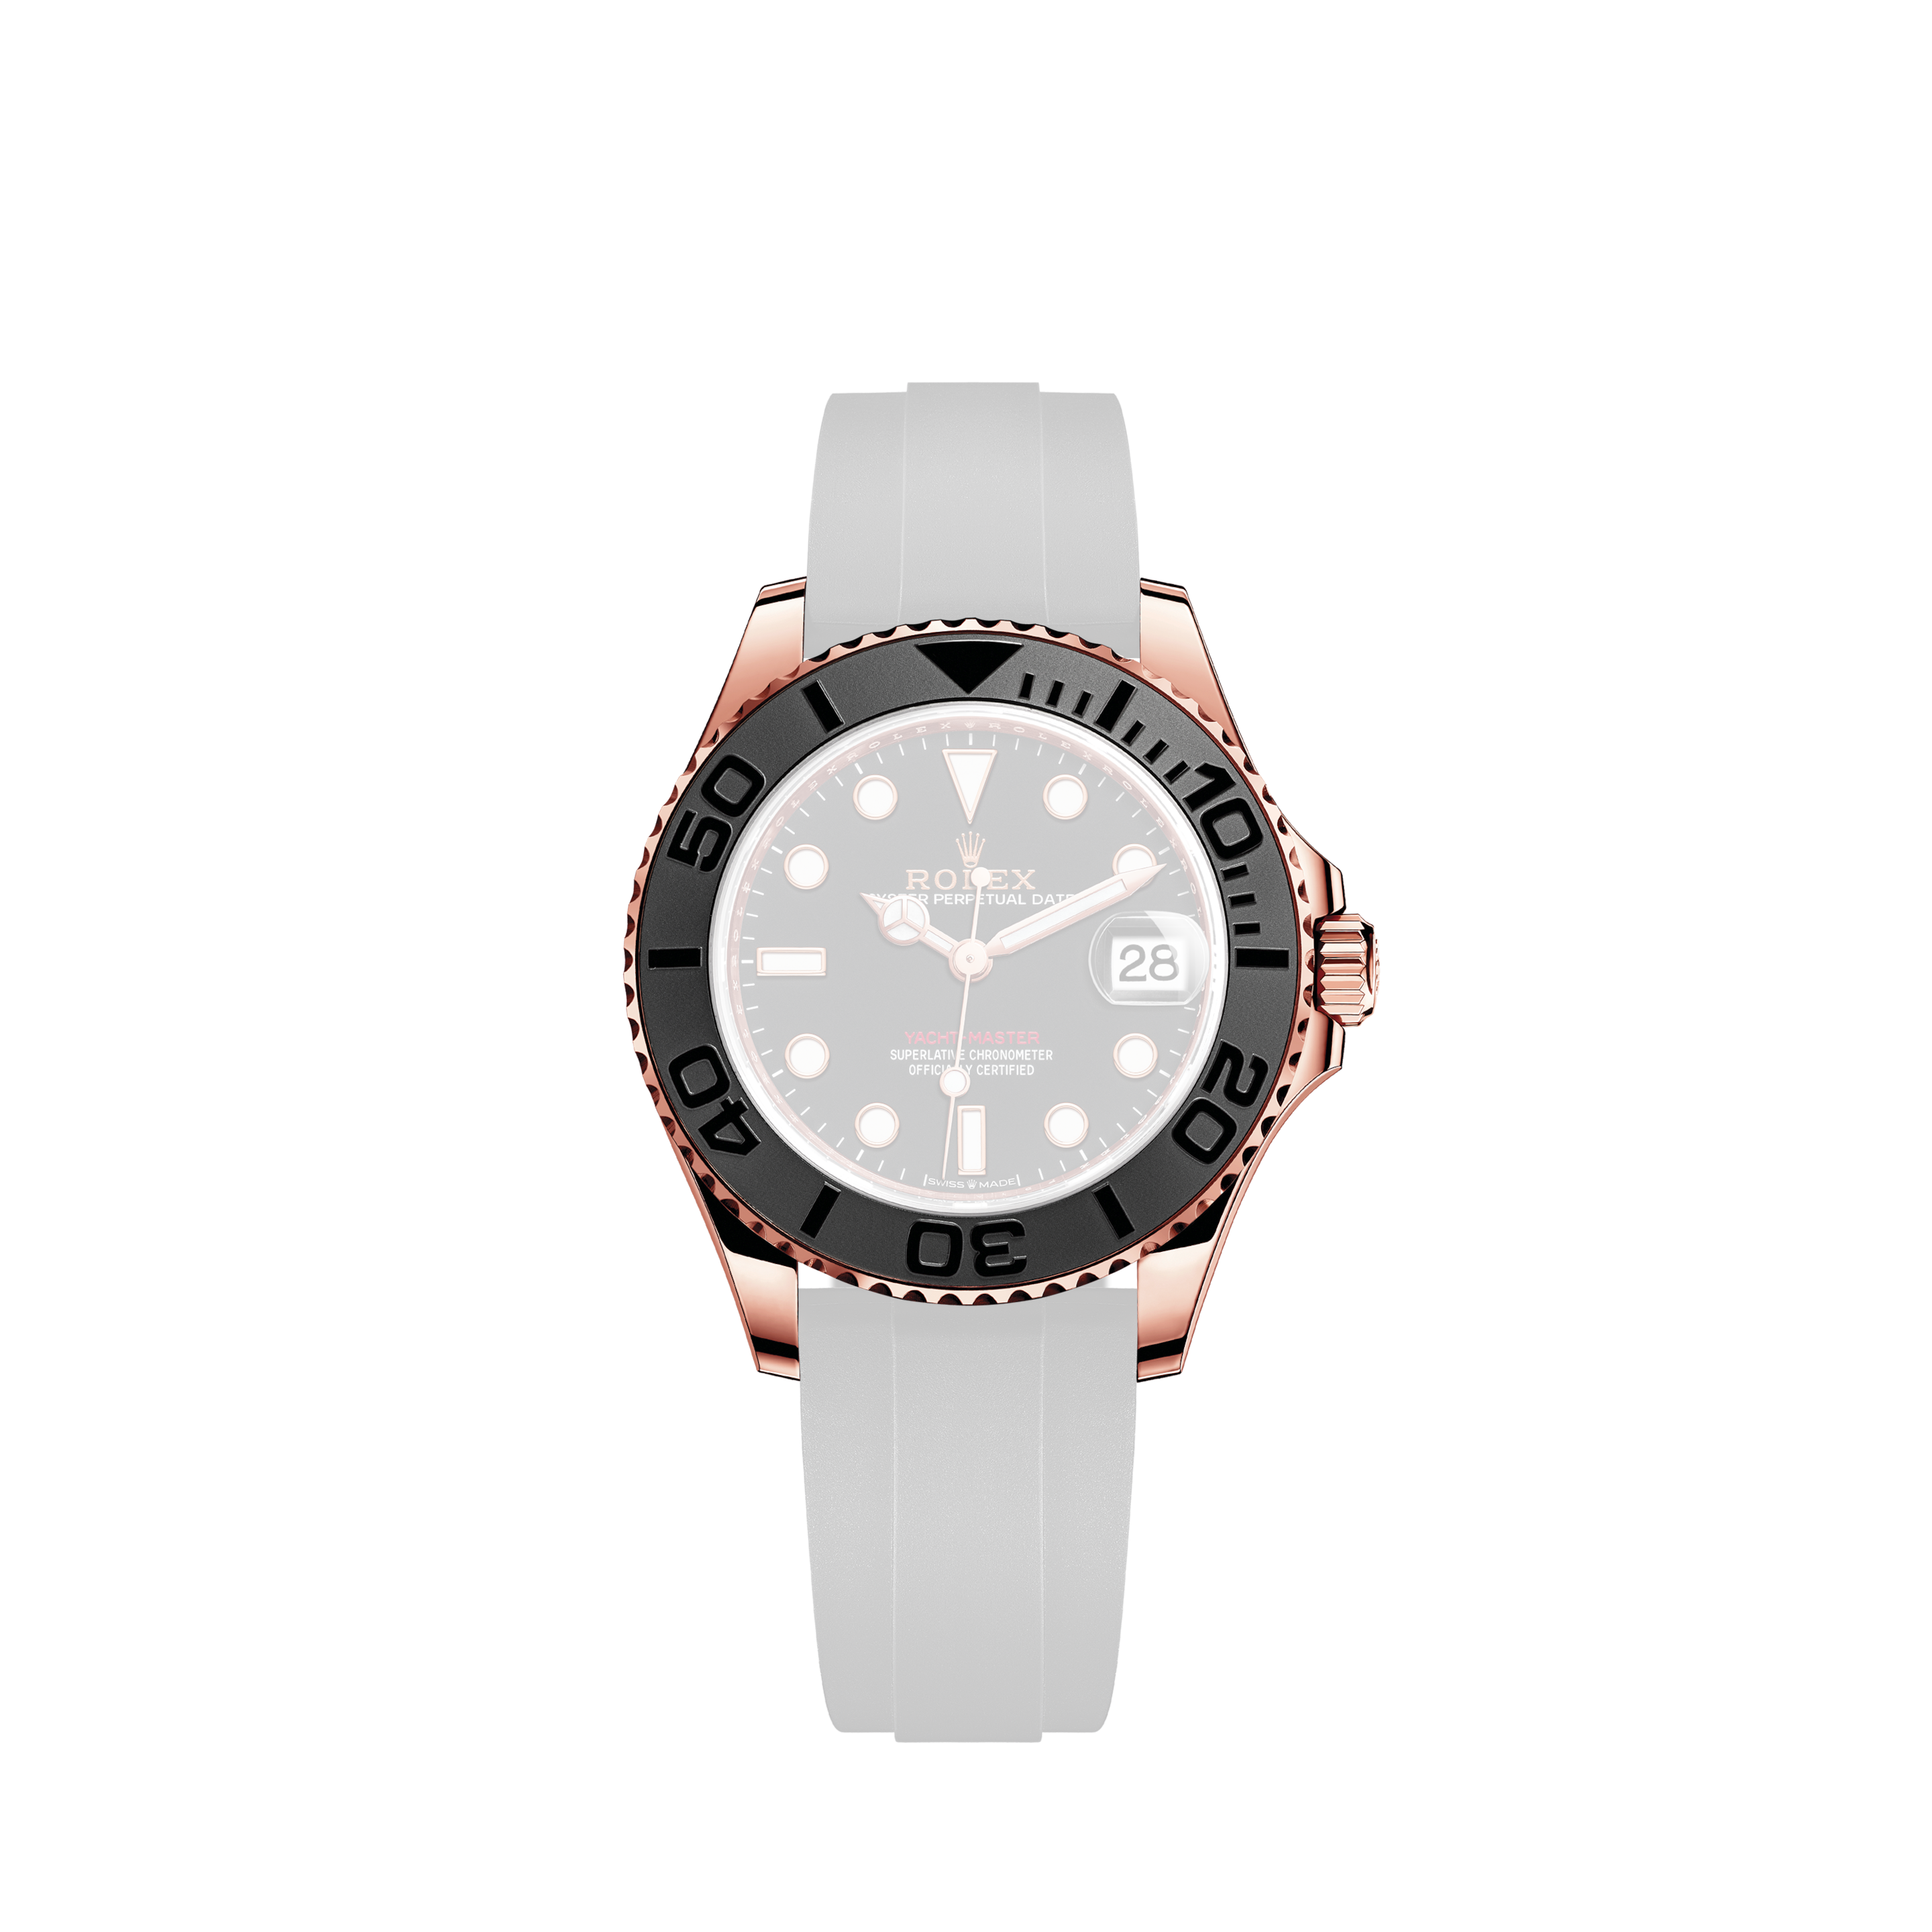 Rolex Oyster Perpetual Submariner 41mm 126618LB